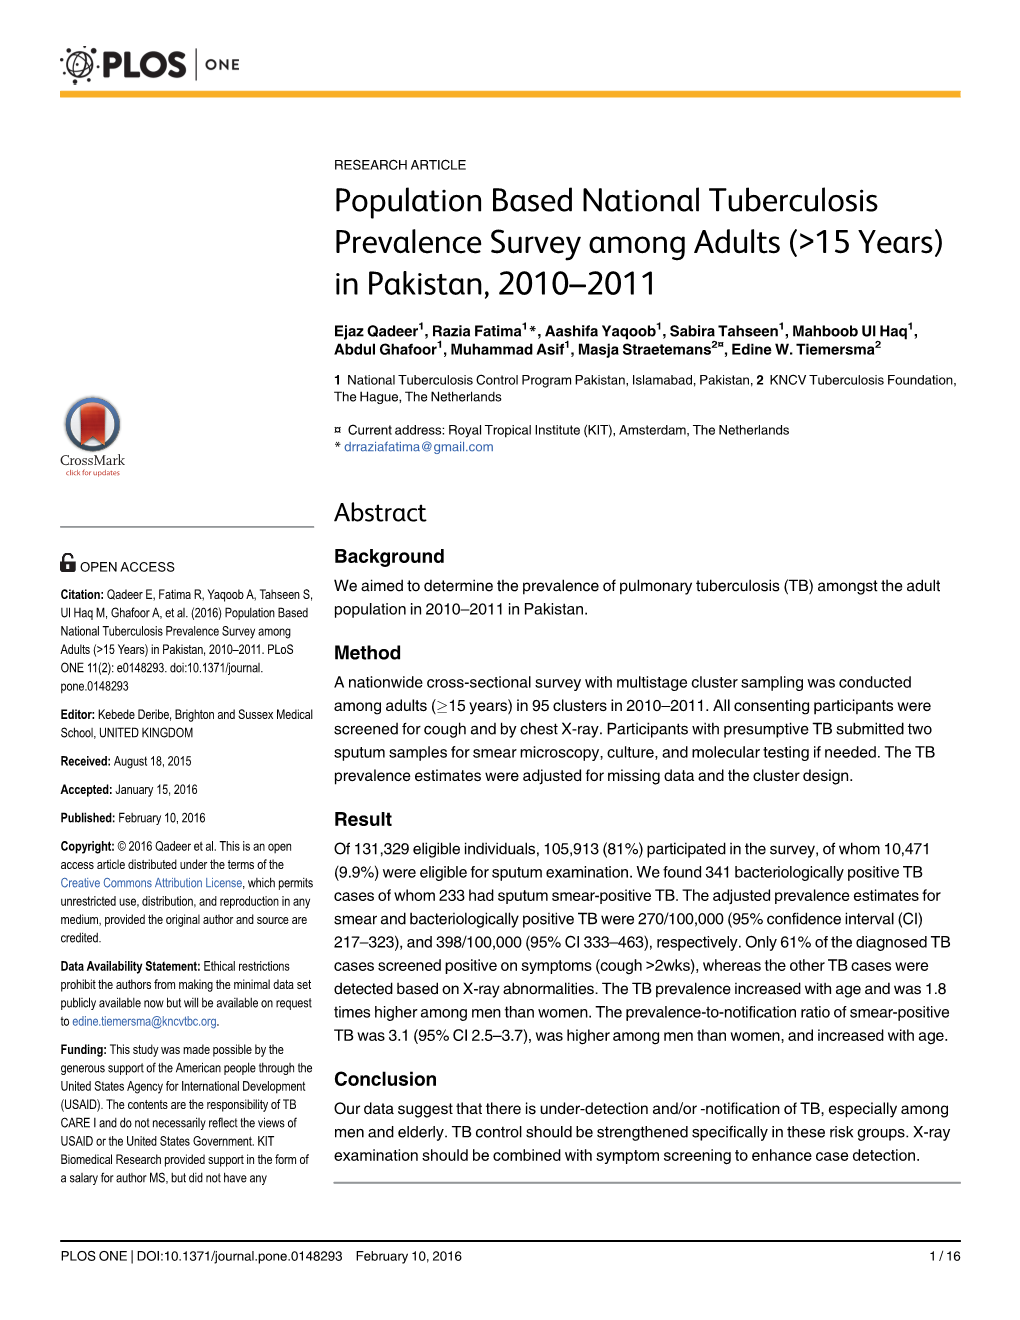 Population Based National Tuberculosis Prevalence Survey Among Adults (>15 Years) in Pakistan, 2010–2011